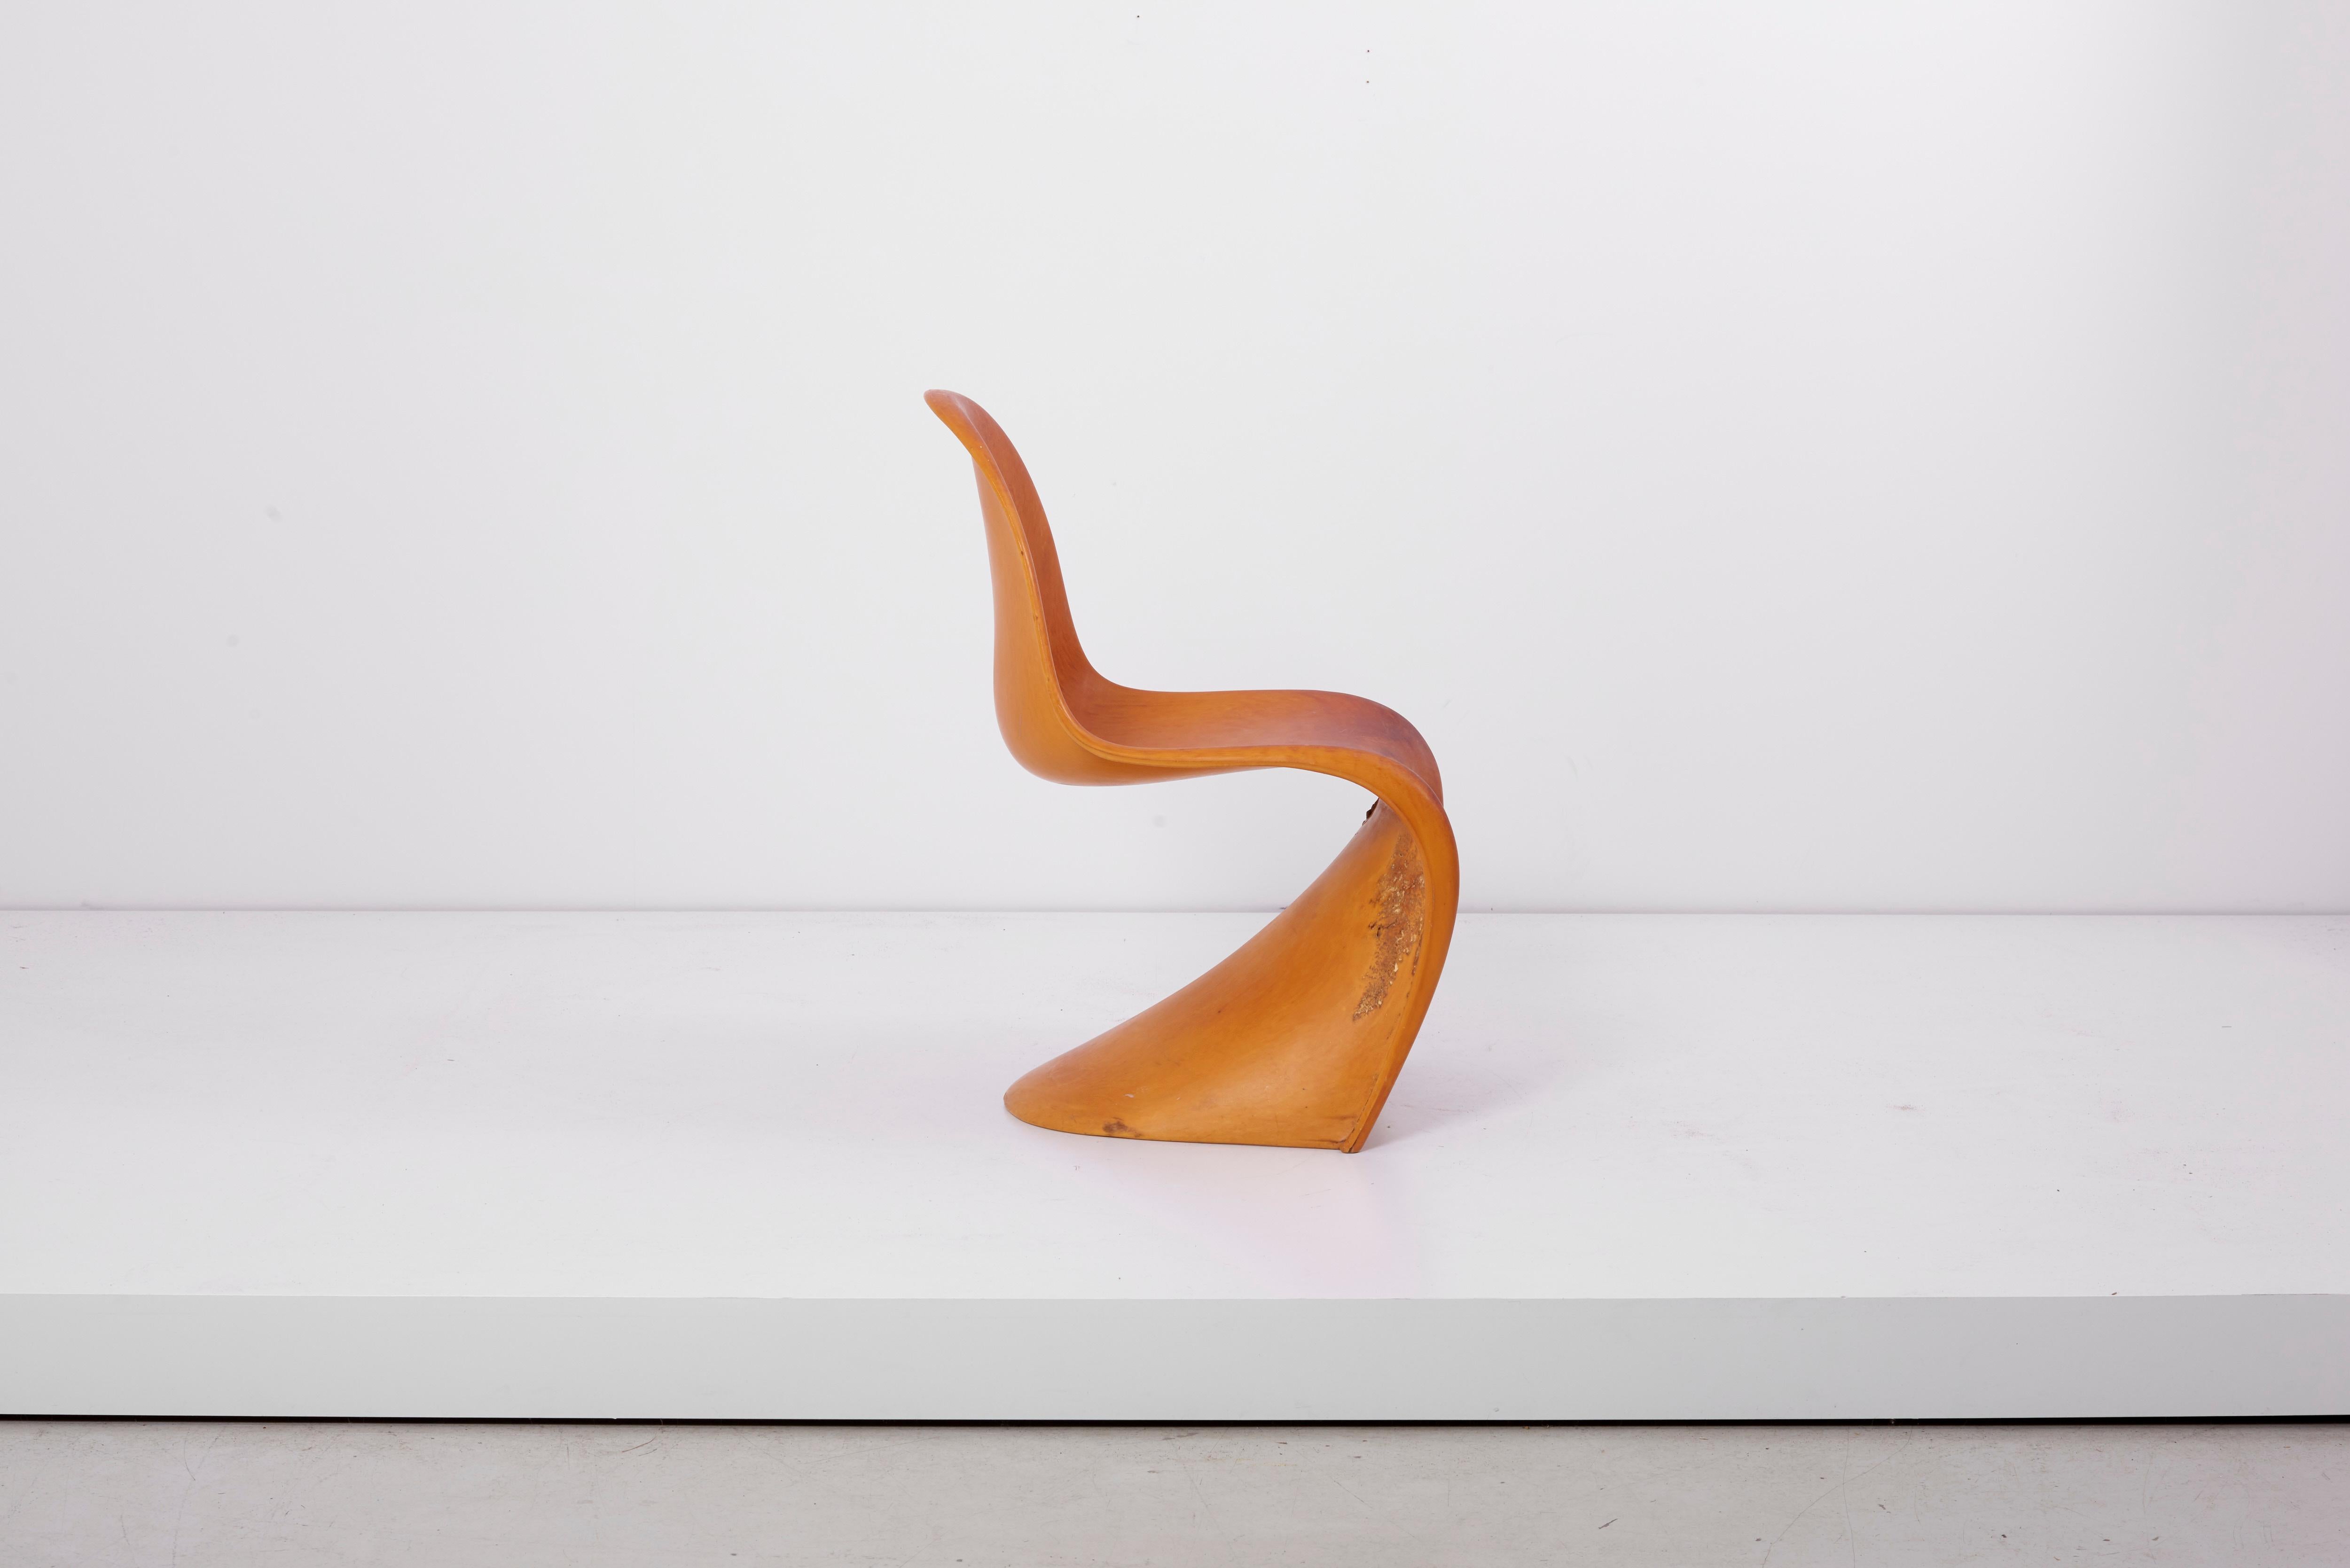 Mid-20th Century Workpiece of the Panton Chair by Verner Panton for Vitra, Germany, circa 1968